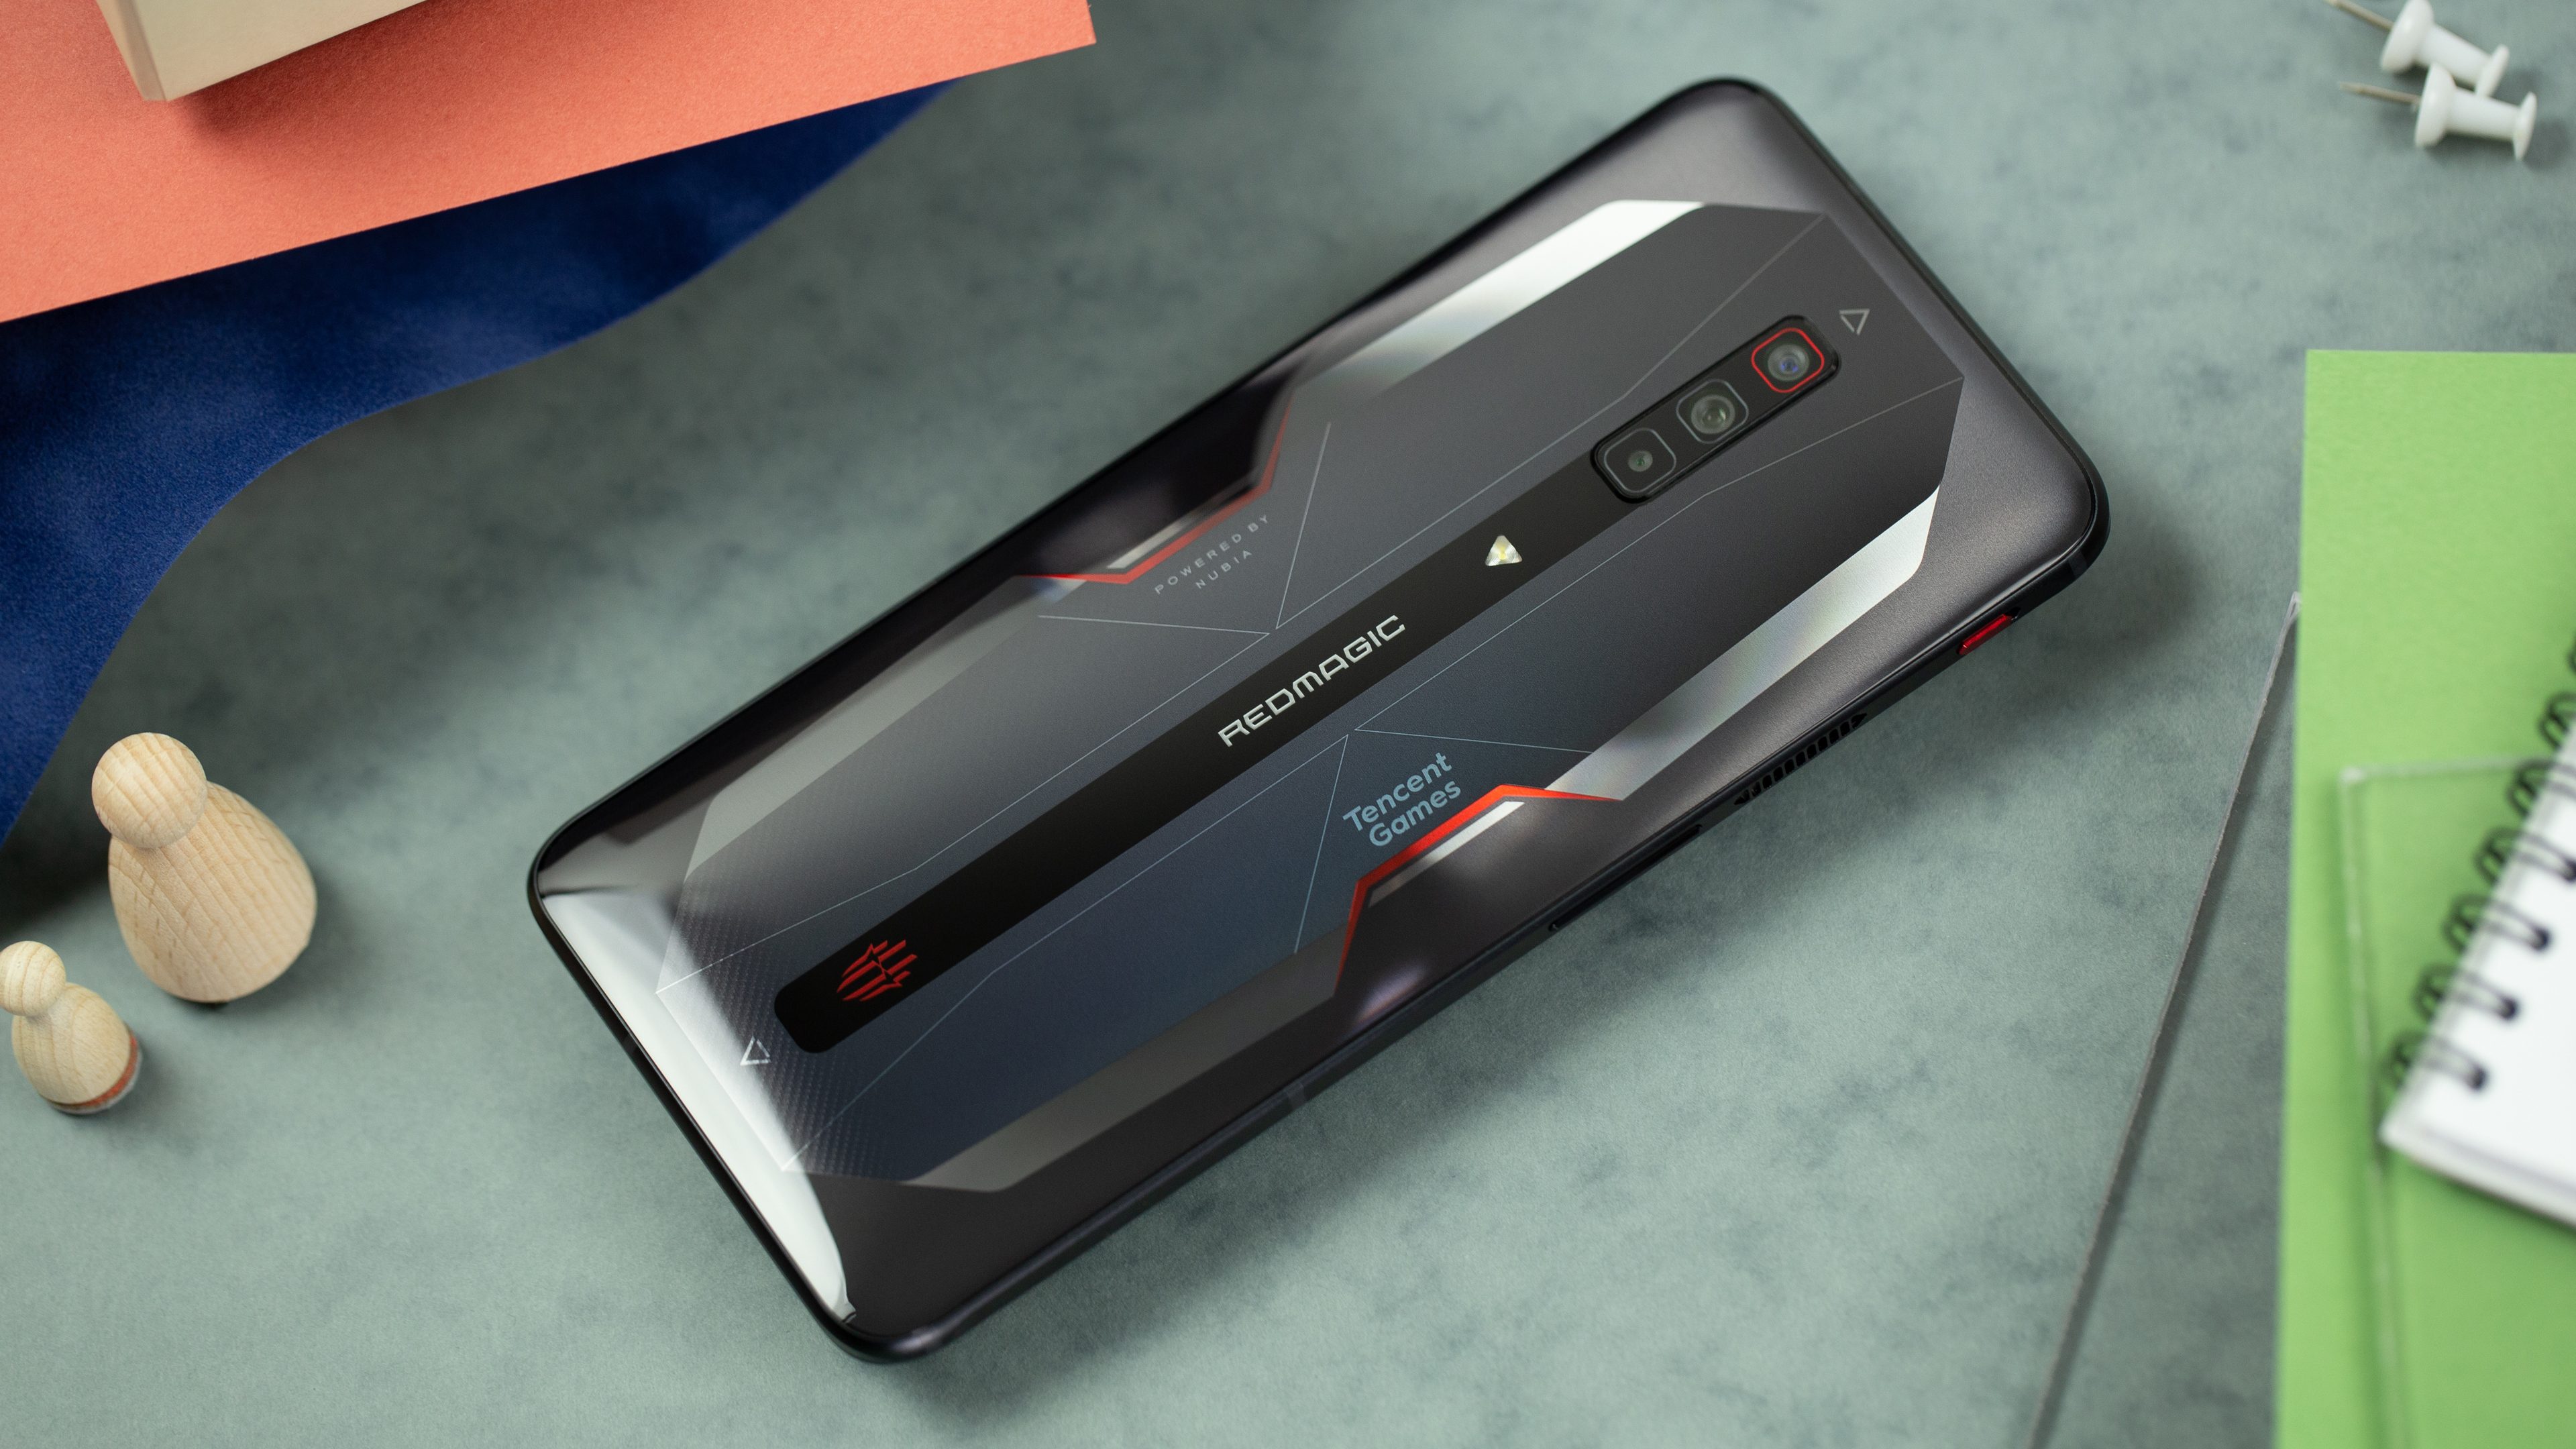 Nubia RedMagic 6 impressions: A very good gaming smartphone, but